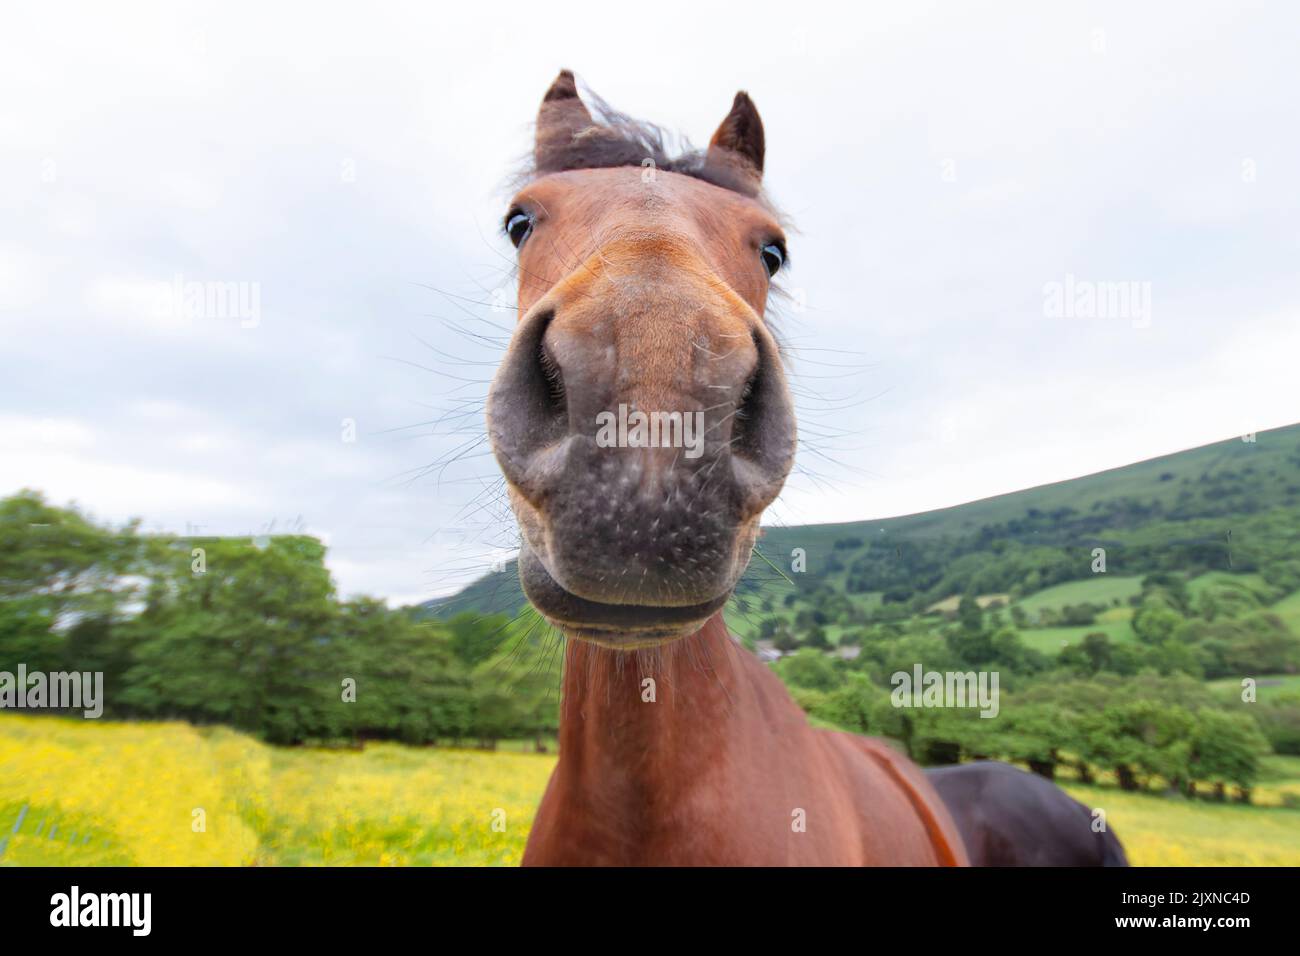 A close up image of a friendly curious horse in open countryside.The image shows the chestnut horse,head on looking straight into the camera. Wales UK Stock Photo